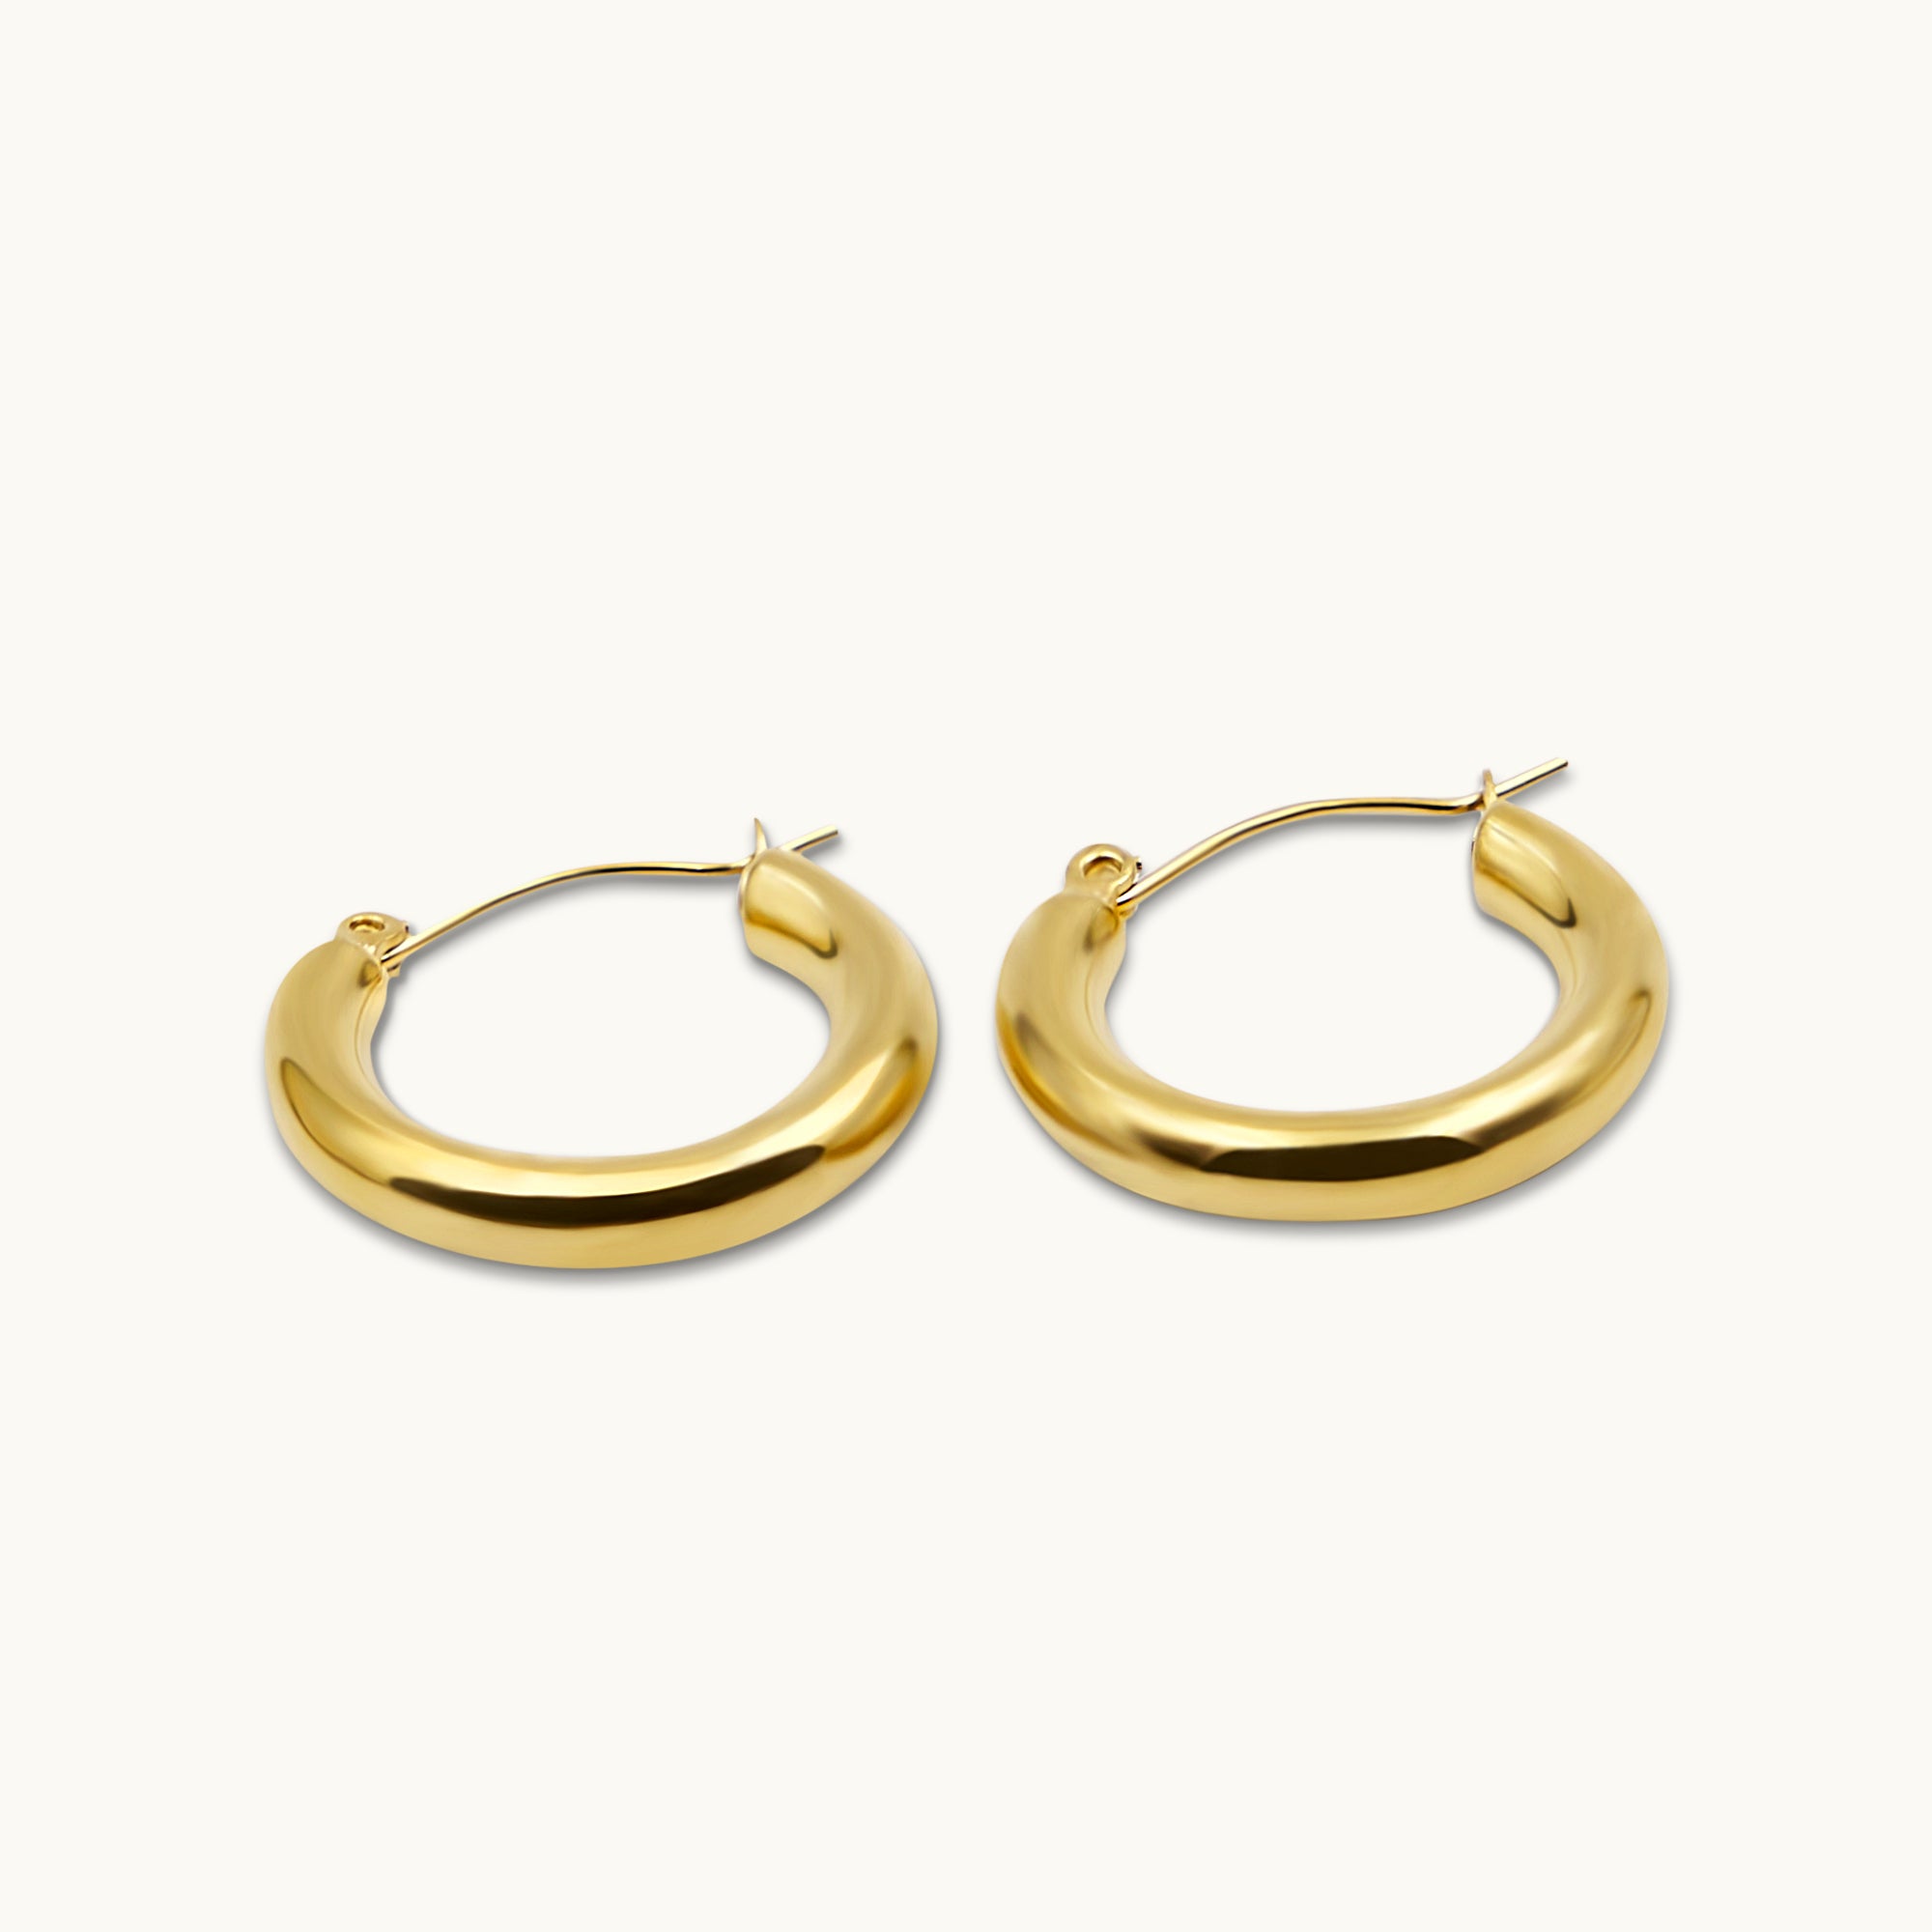 BOLD LARGE HOOPS IN GOLD 23mm